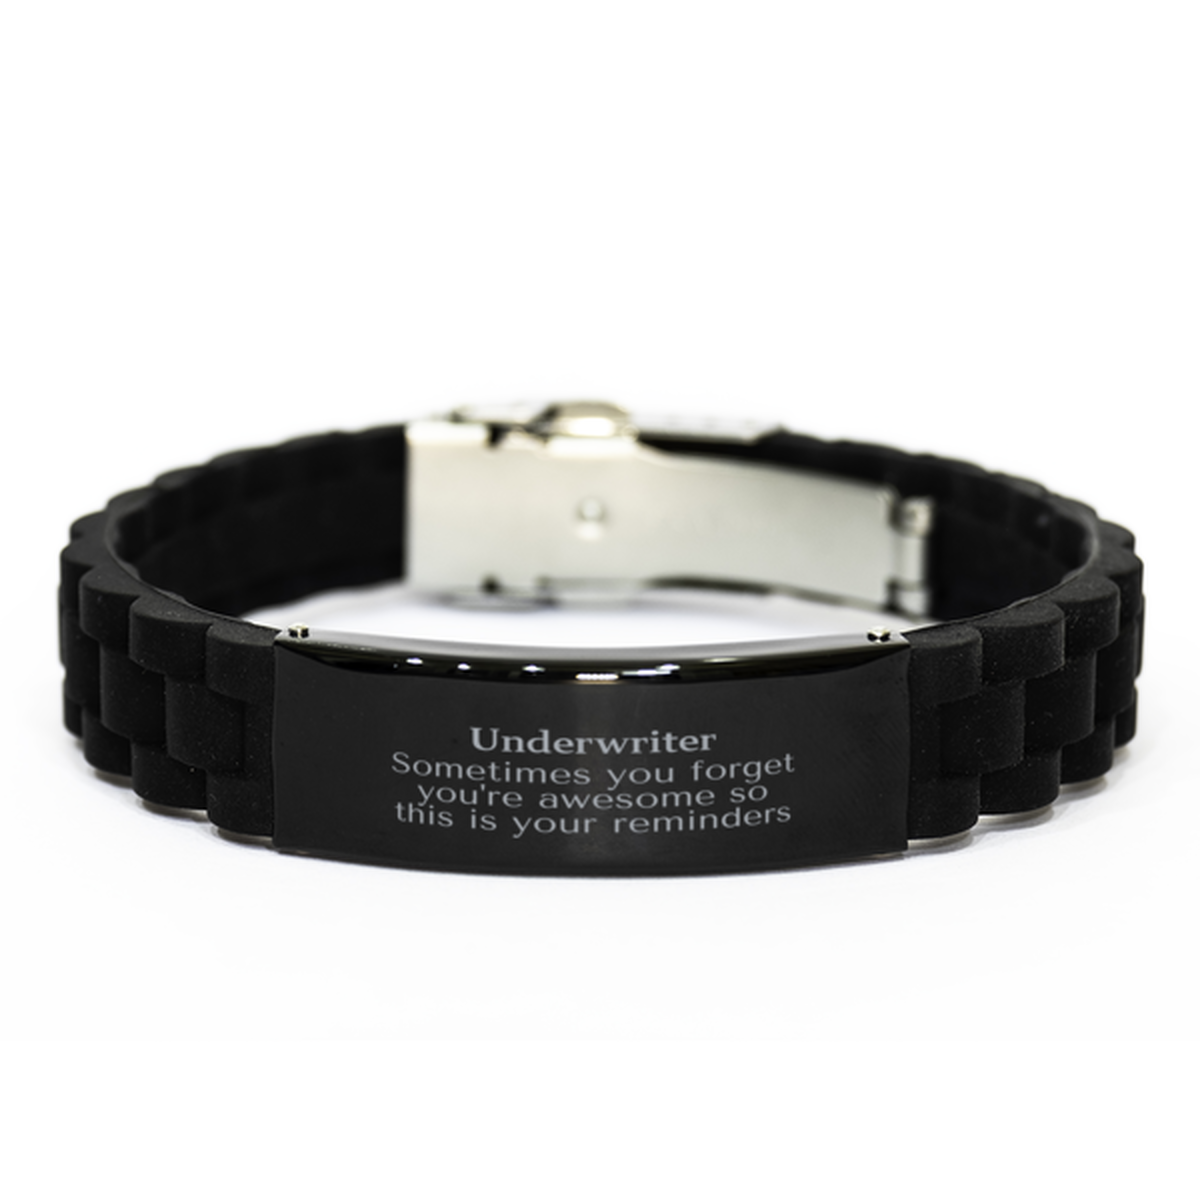 Sentimental Underwriter Black Glidelock Clasp Bracelet, Underwriter Sometimes you forget you're awesome so this is your reminders, Graduation Christmas Birthday Gifts for Underwriter, Men, Women, Coworkers